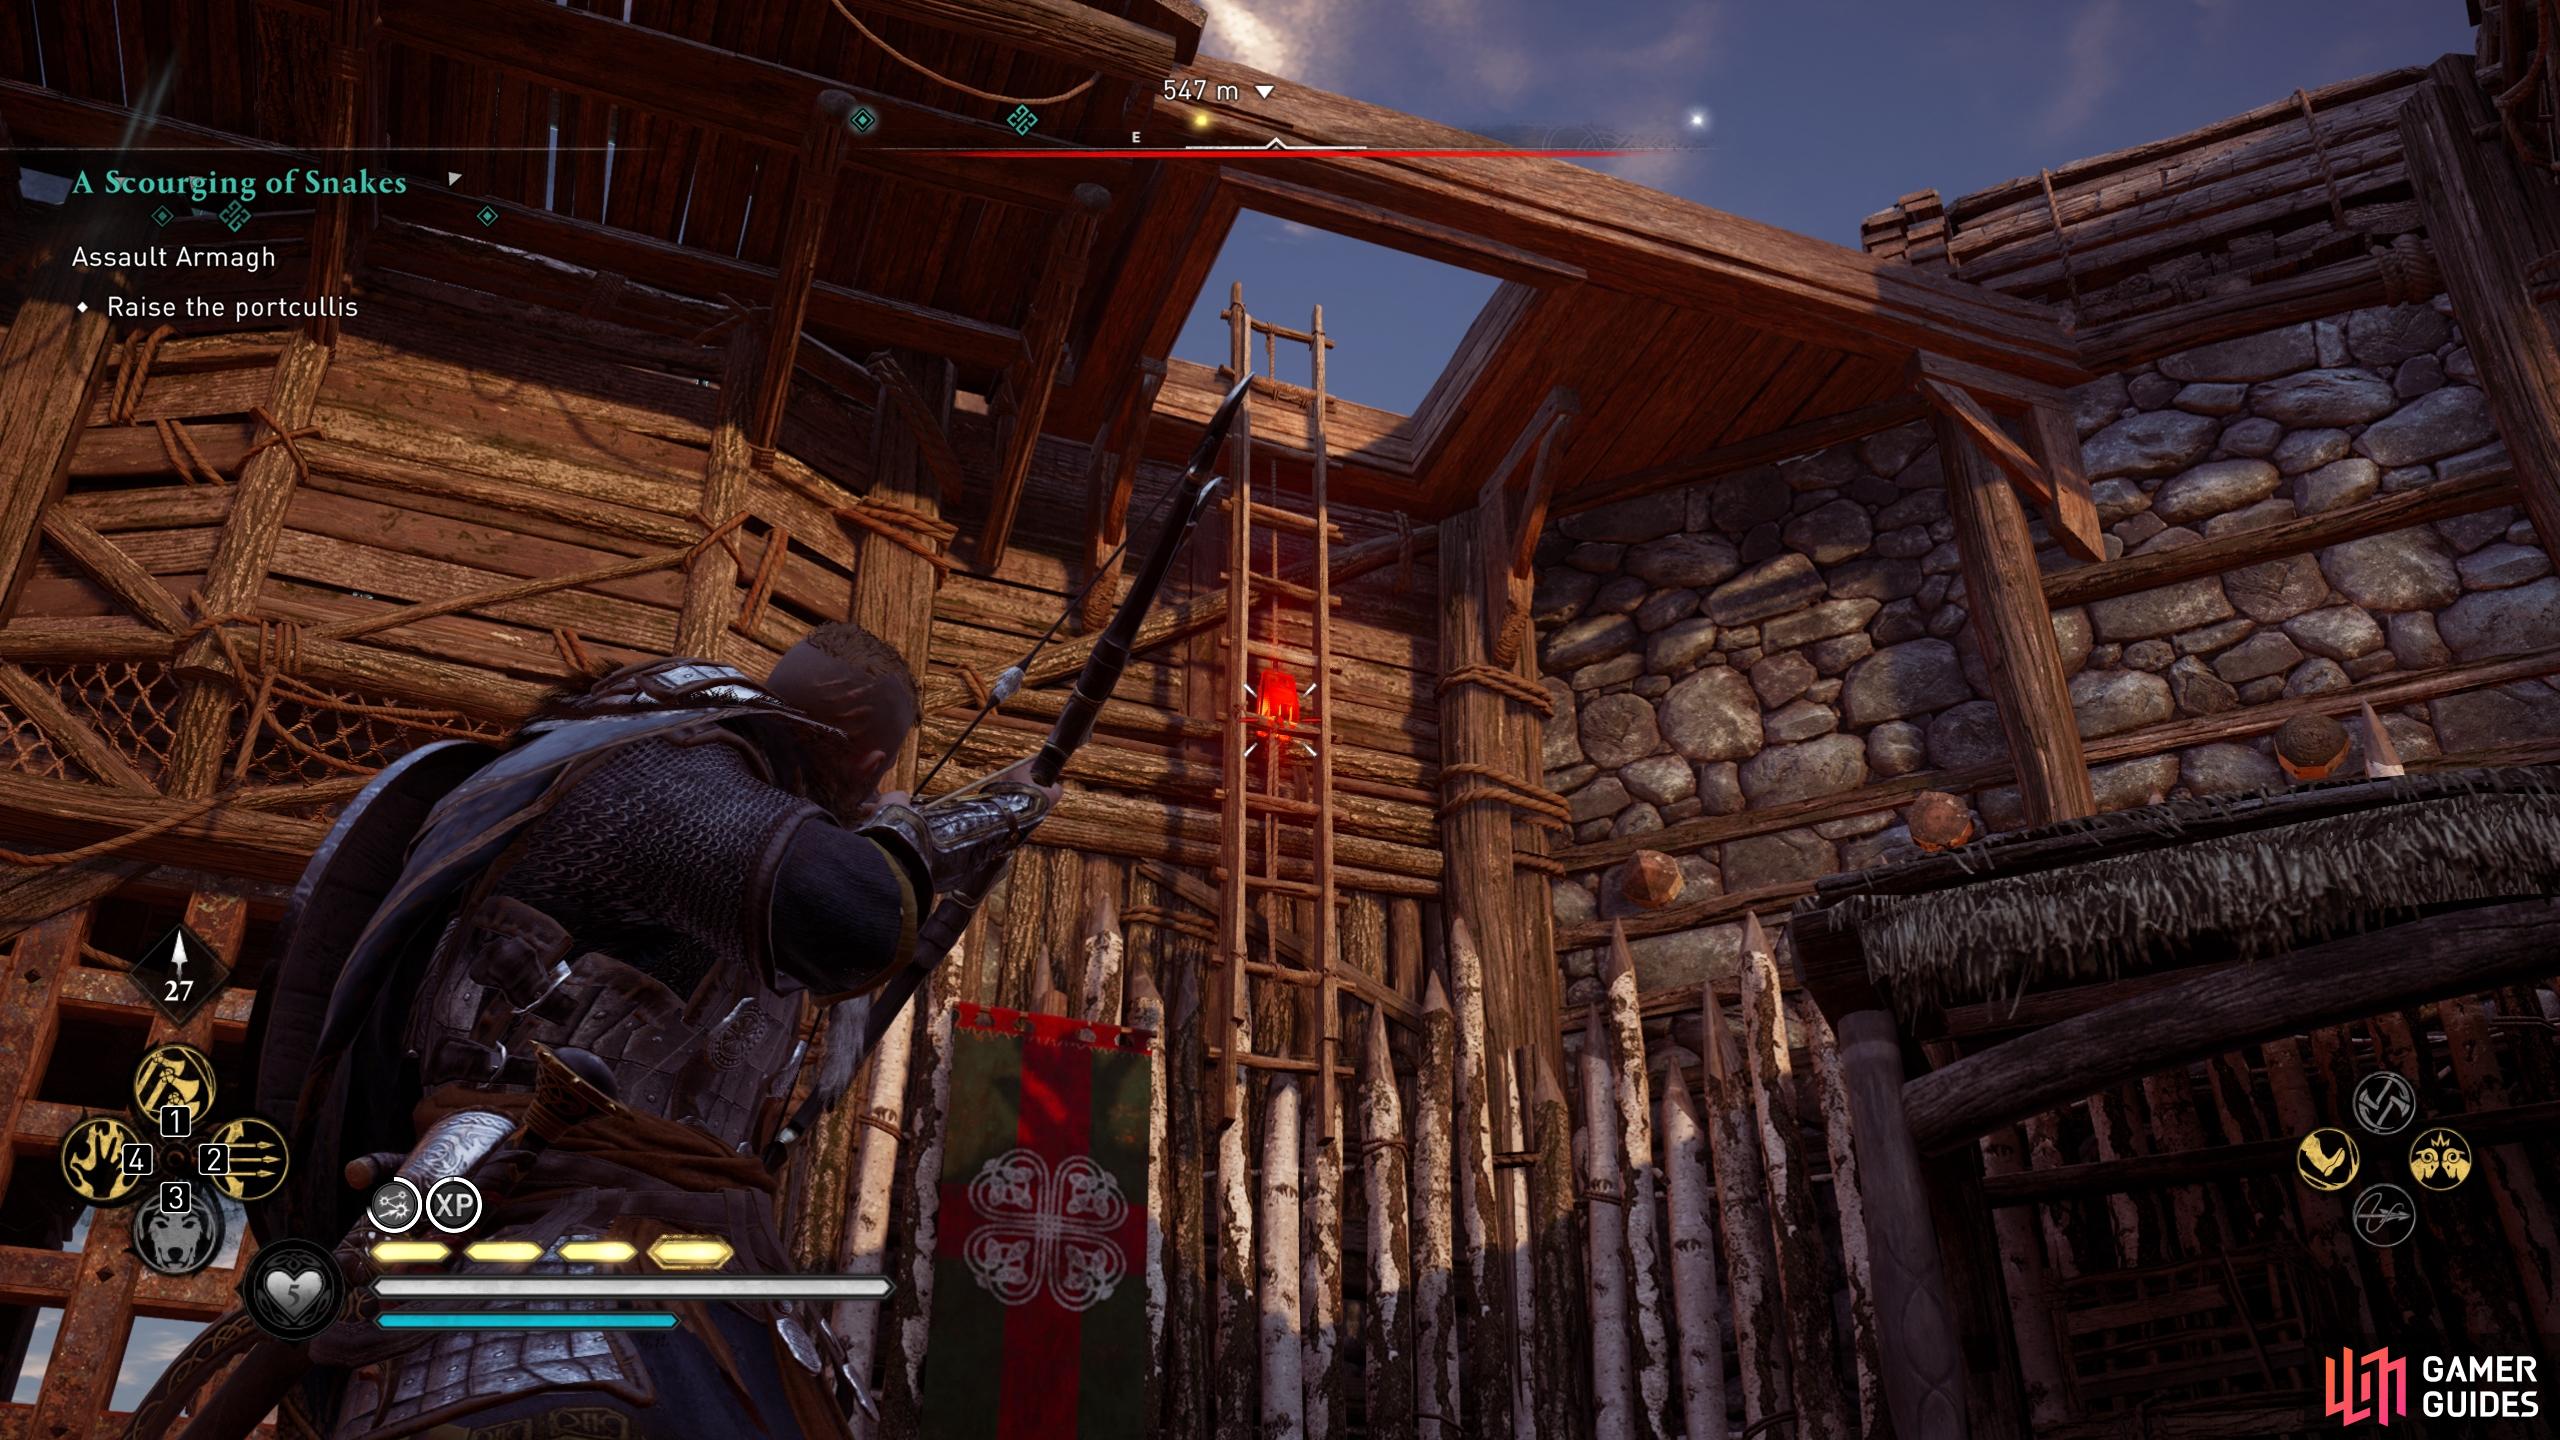 Shoot the link on the ladder to the right of the gate to reach the portcullis.